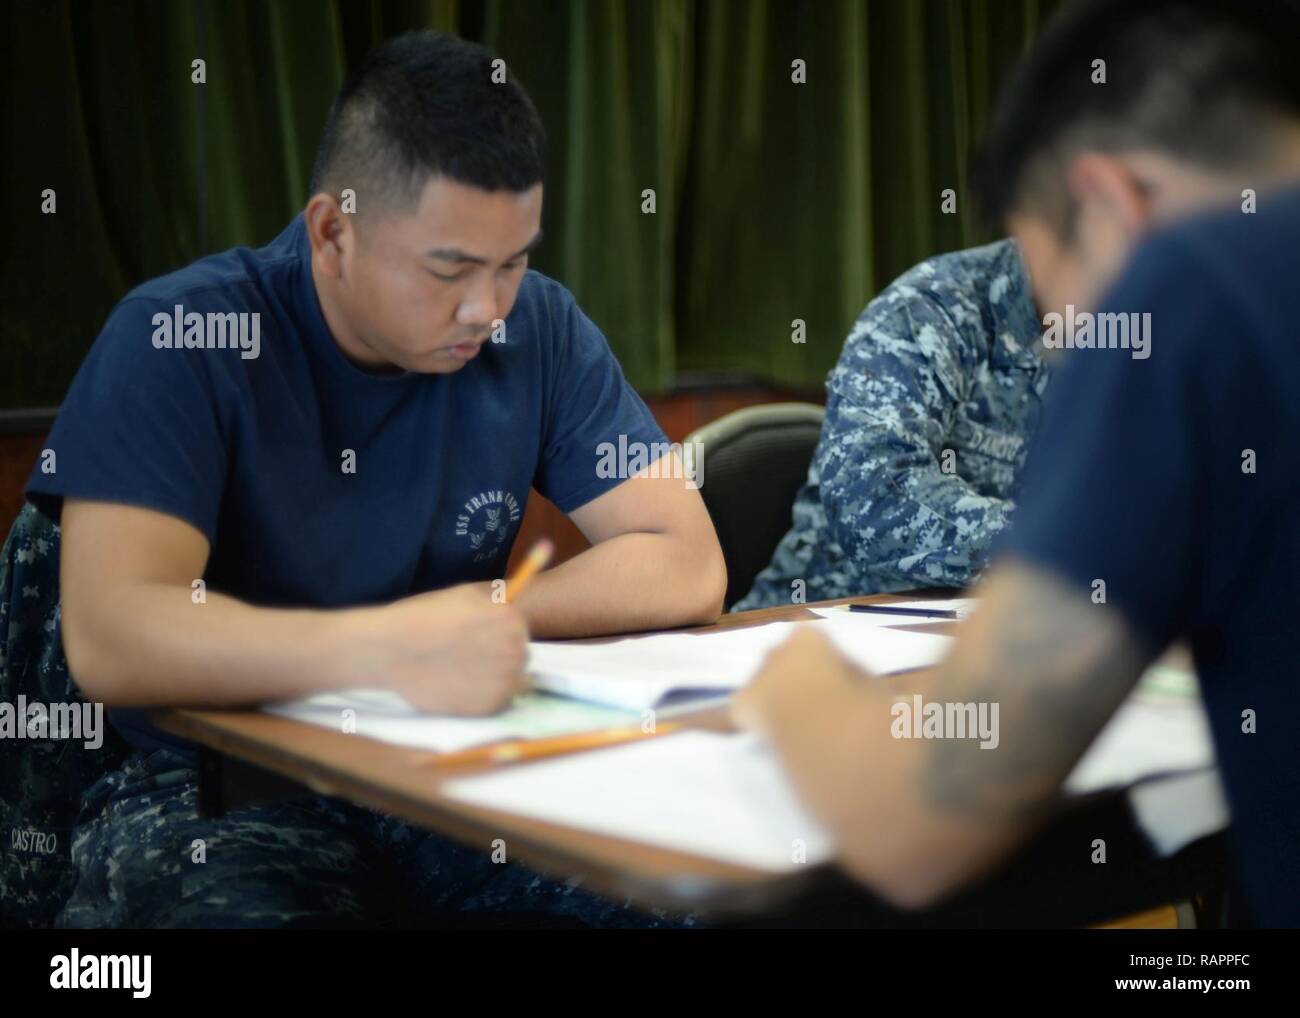 ANTA RITA, Guam (March 2, 2017) – Boatswain’s Mate 2nd Class Delmar Castro, assigned to the submarine tender USS Frank Cable (AS 40) and native of Sacramento, Calif., takes the Navy-wide E-6 advancement exam at Naval Base Guam, March 2.  Frank Cable is forward-deployed to the island of Guam and conducts maintenance and support of submarines and surface vessels deployed to the U.S. 5th and 7th Fleet area of operations. Stock Photo